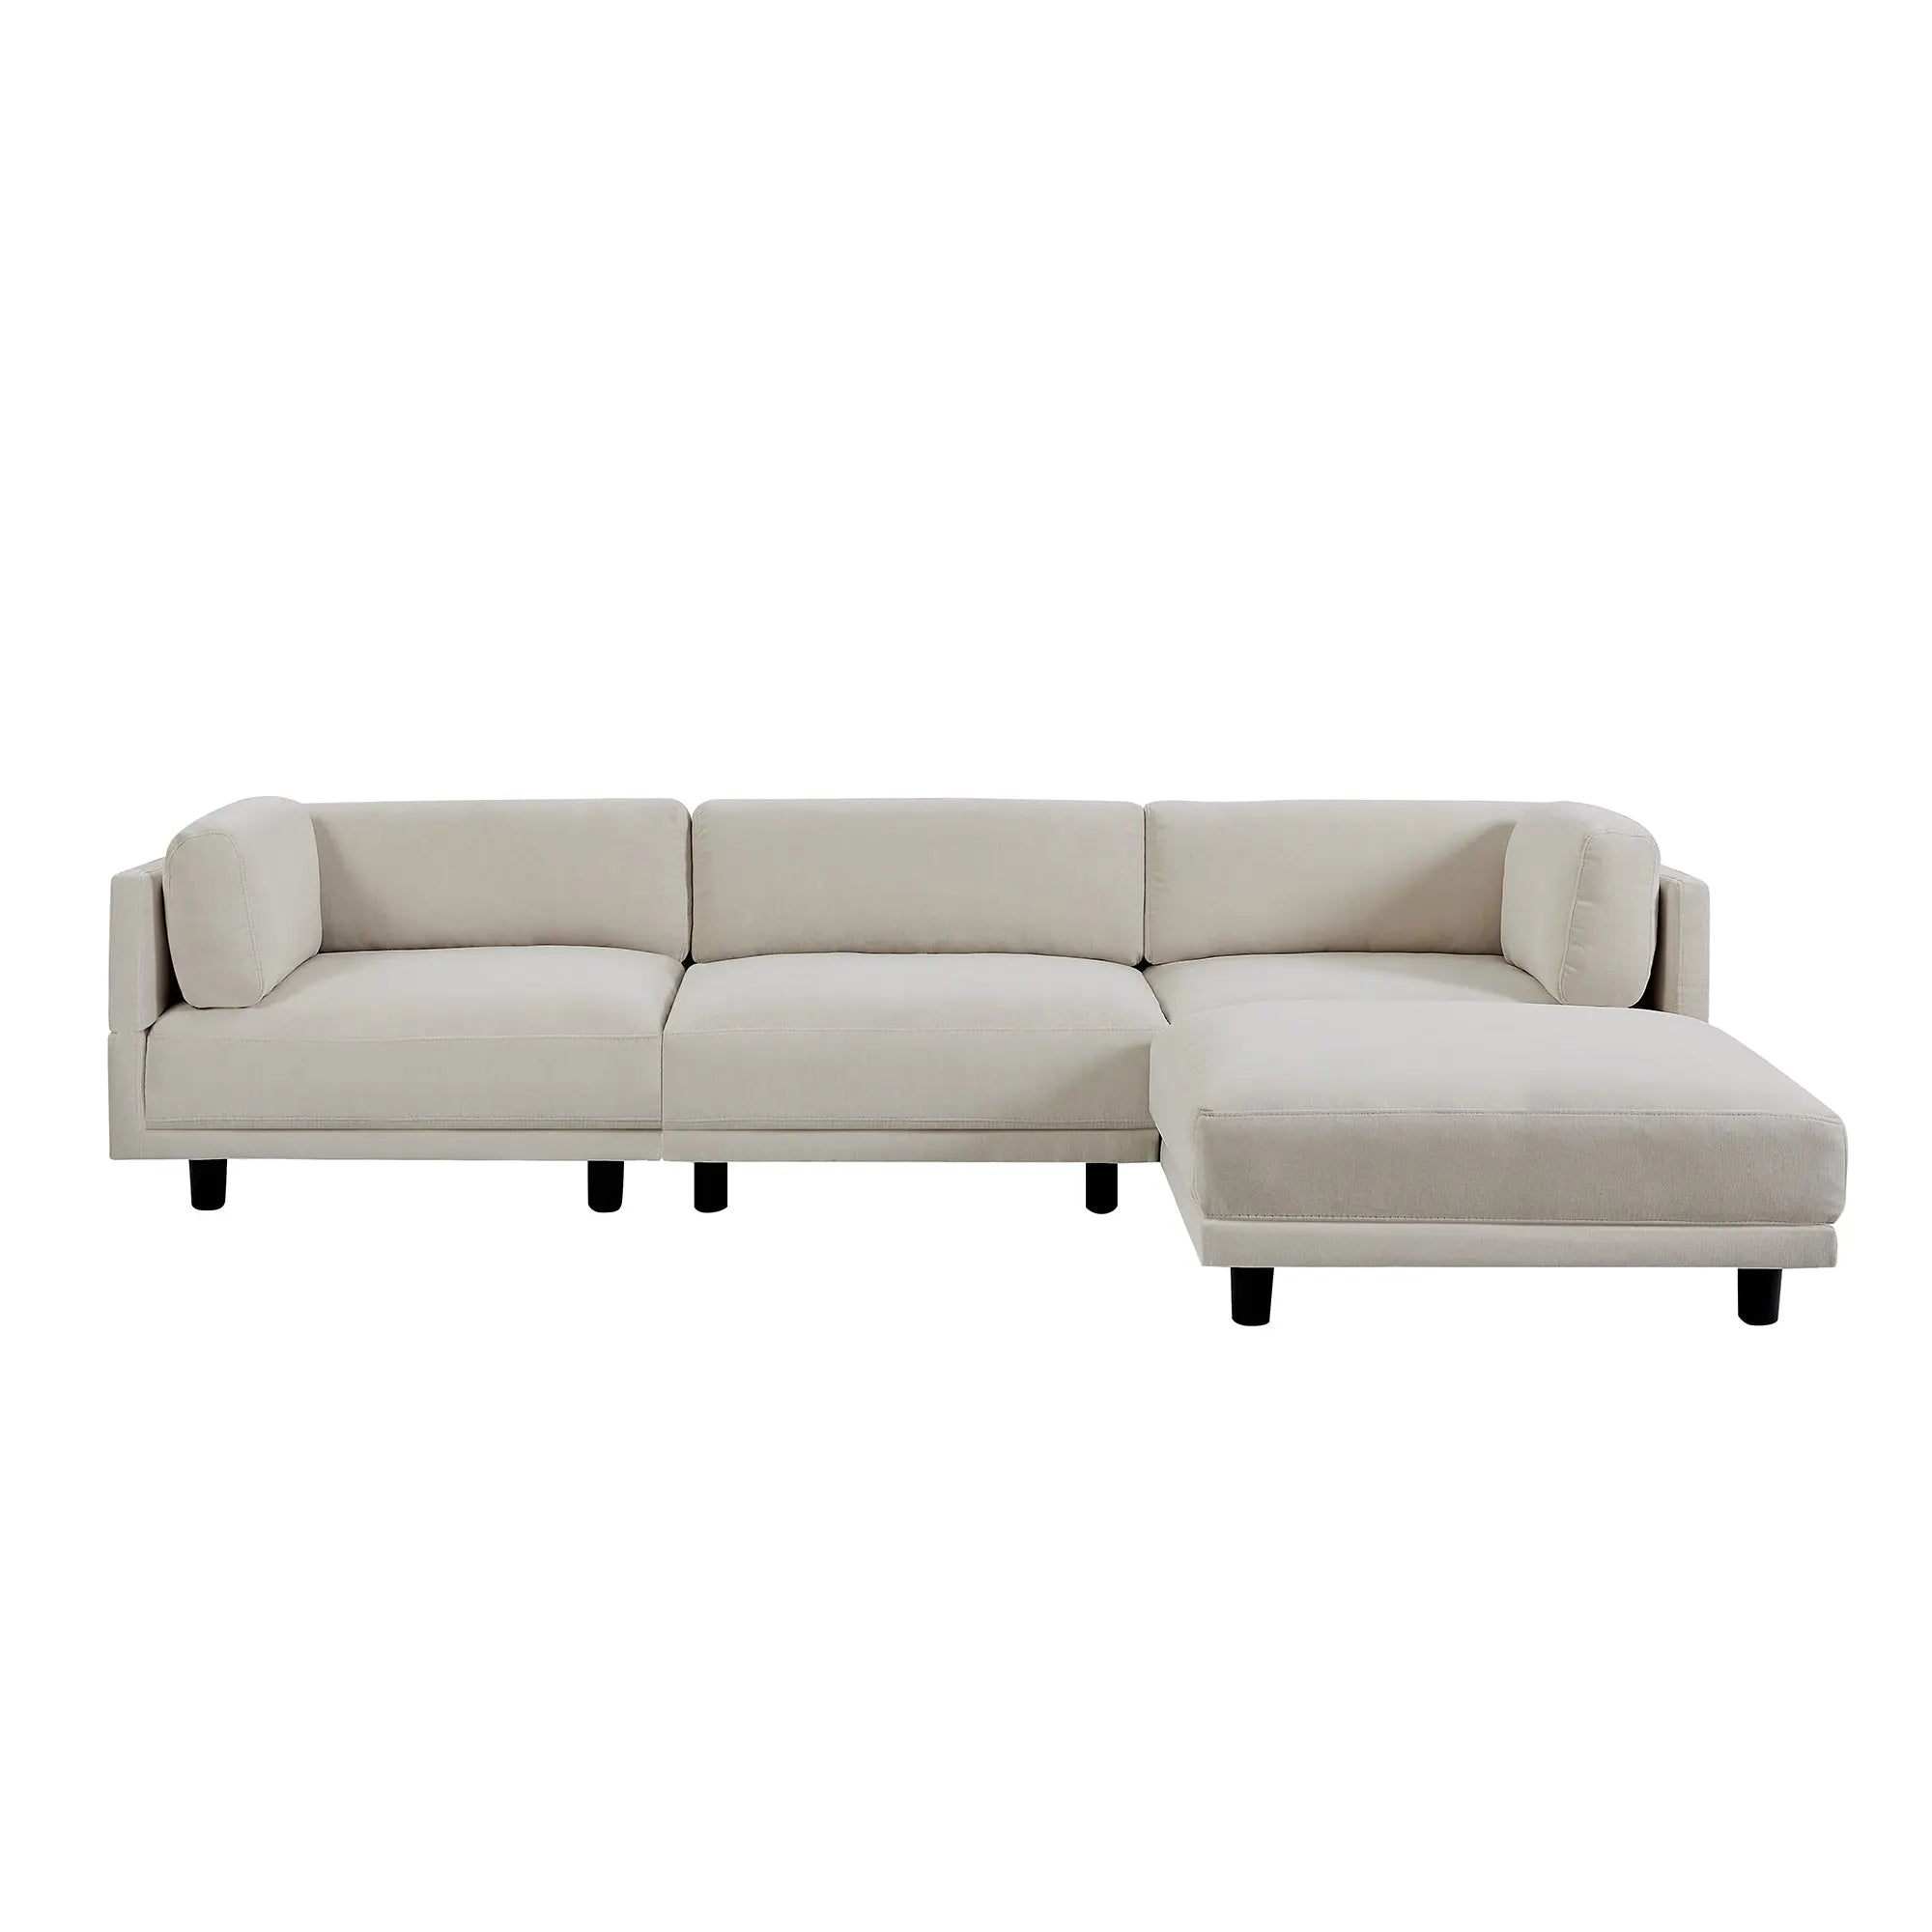 Bellemave® 102.4" Upholstery Convertible Sectional Sofa, L Shaped Couch with Reversible Chaise Bellemave®